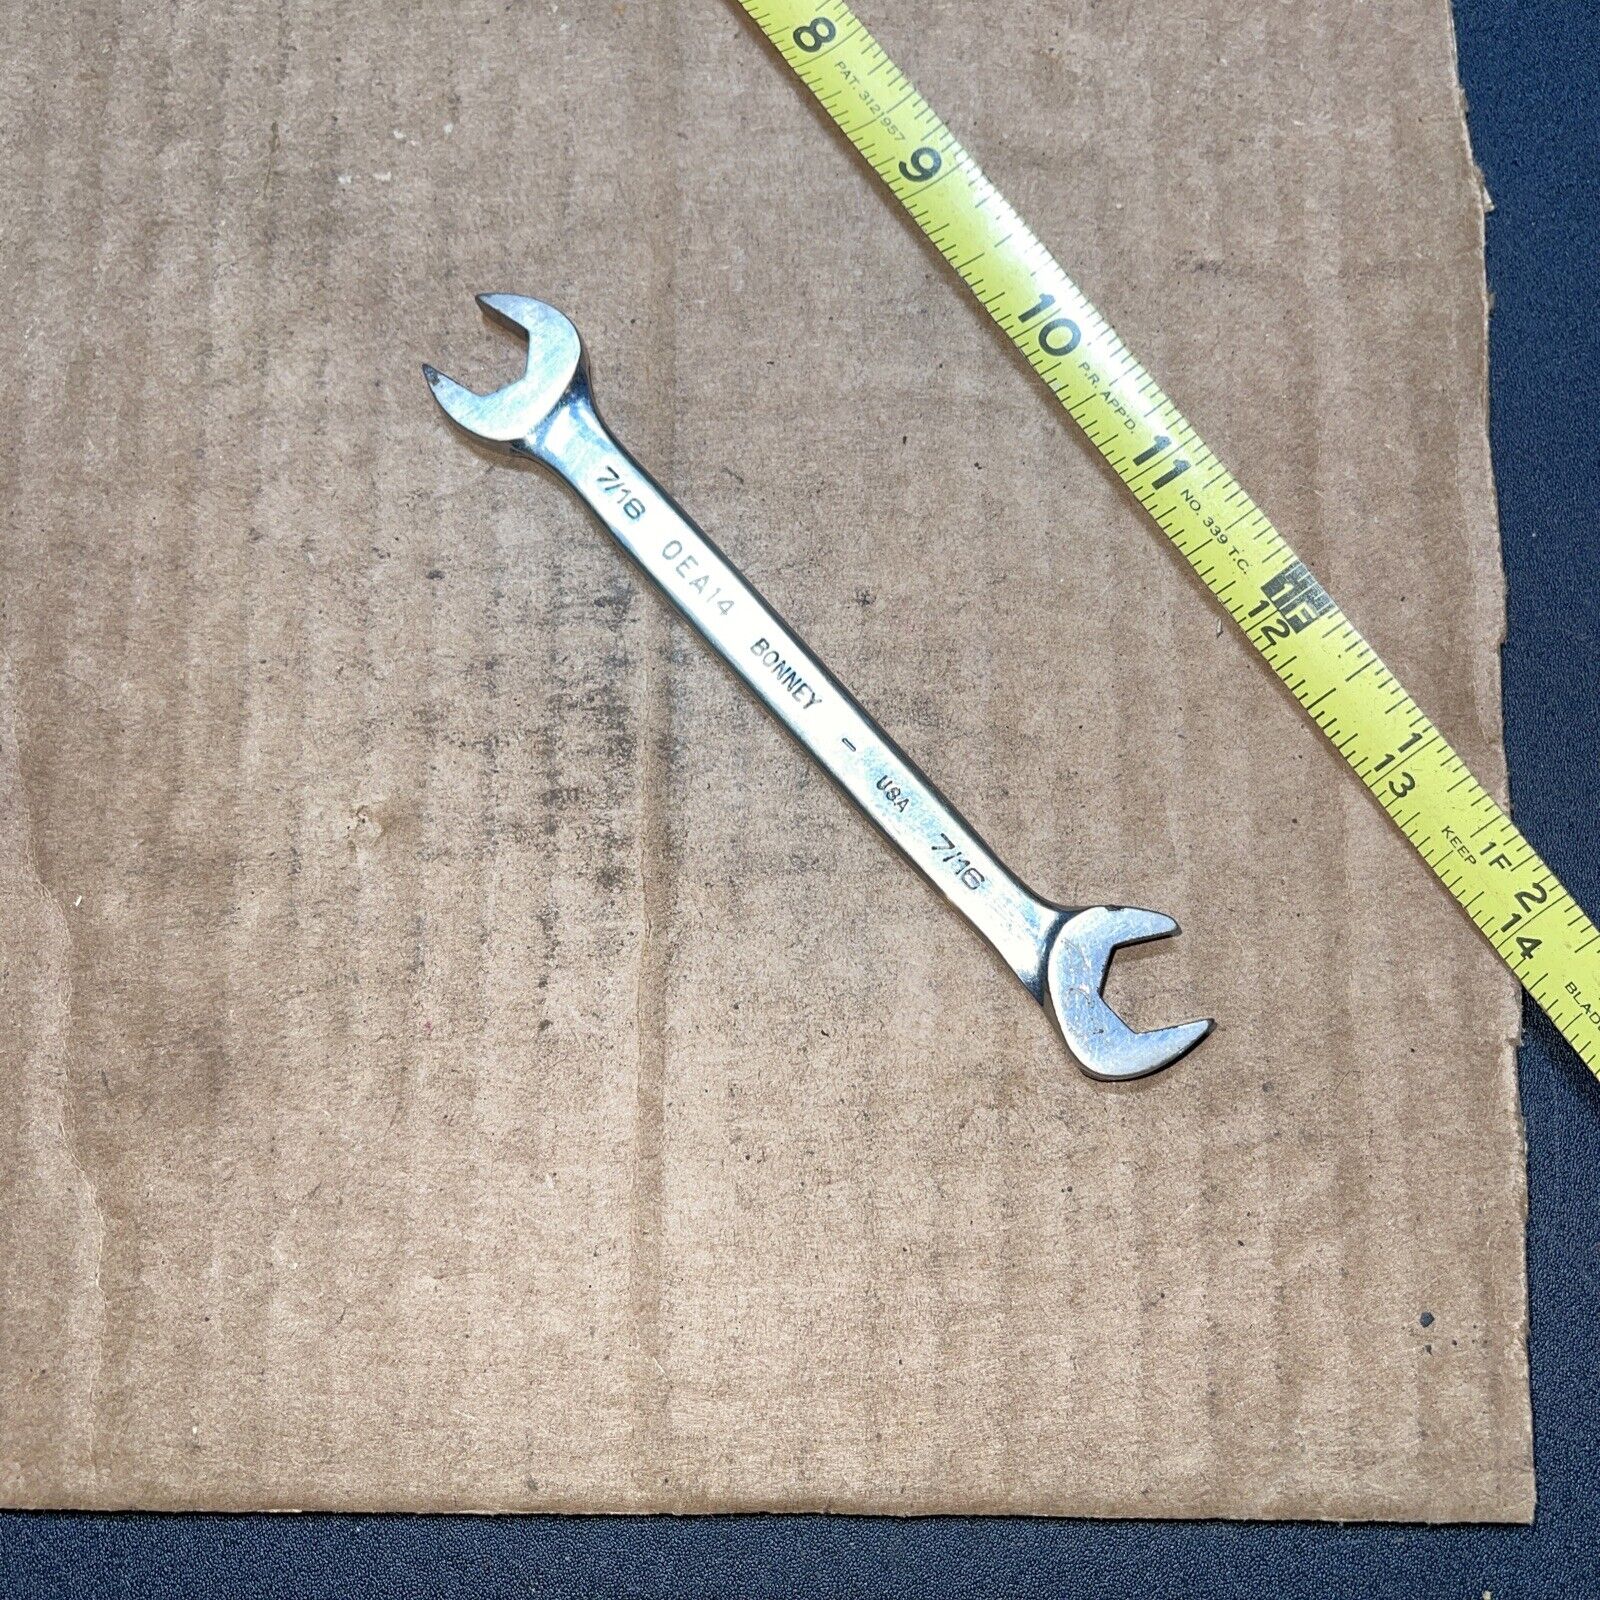 BONNEY USA OEA14 7/16in Open End SAE ANGLE 6pt WRENCH Vintage